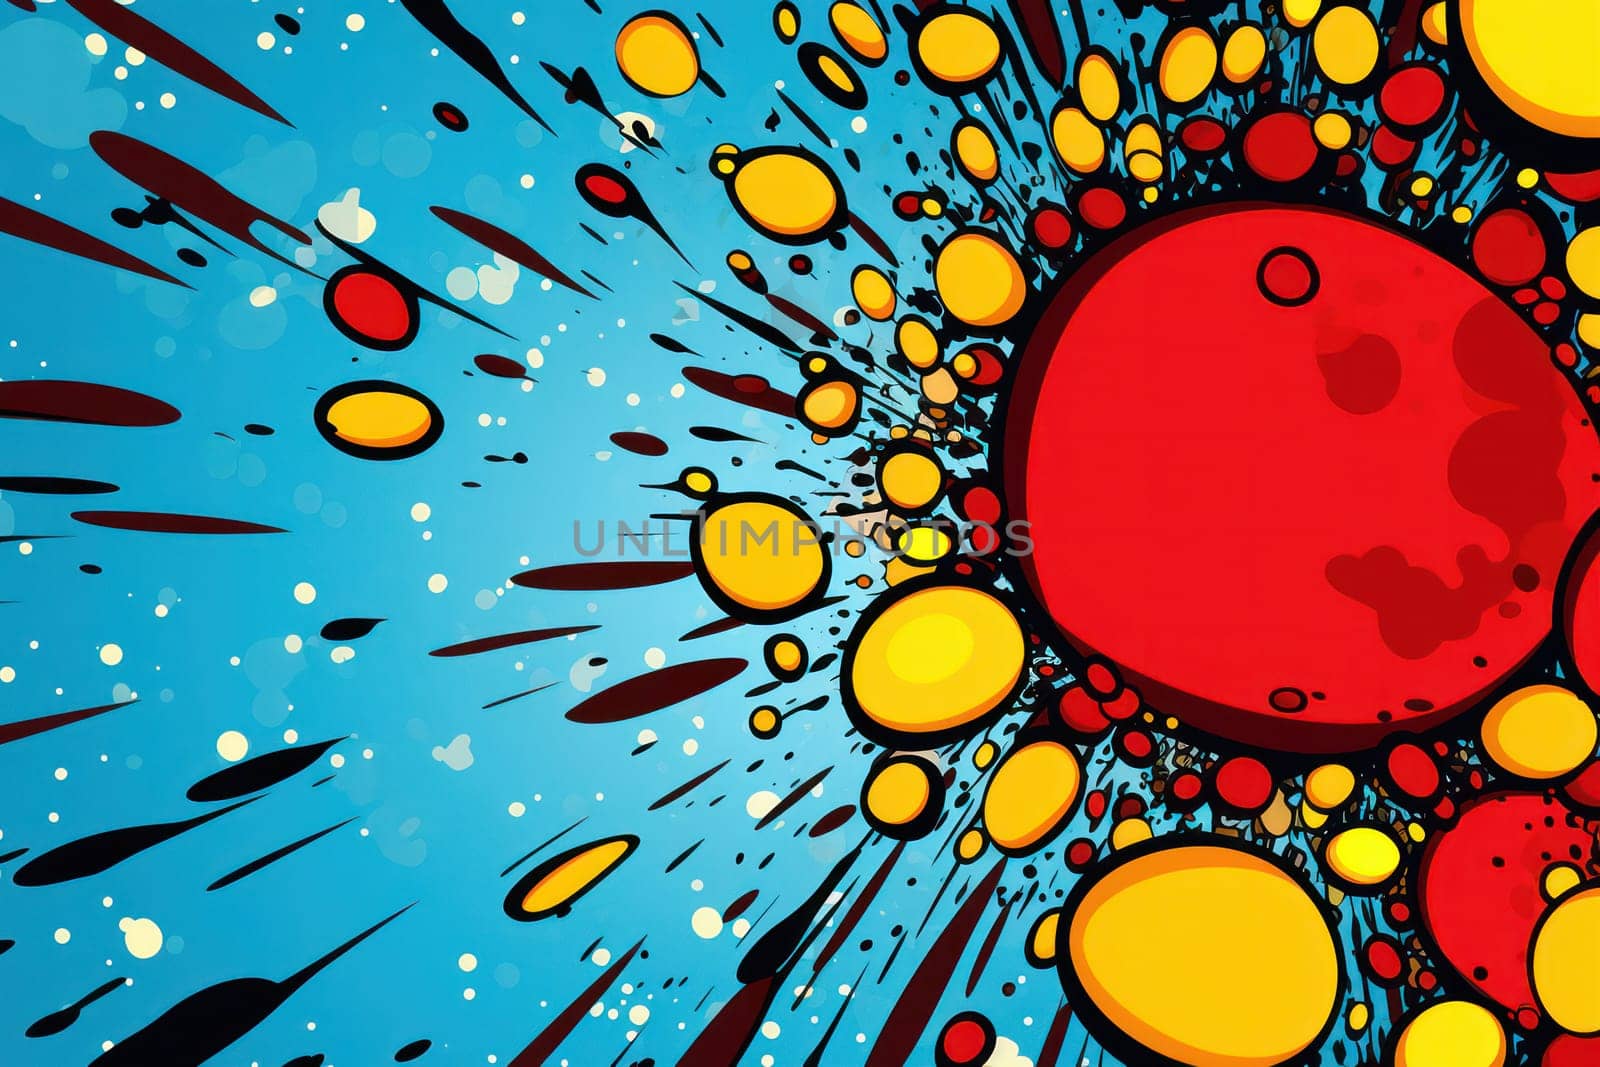 Retro Comic Explosion: Abstract Pop Art Illustration with Colored Boom and Vintage Style Speech Bubble on White Background